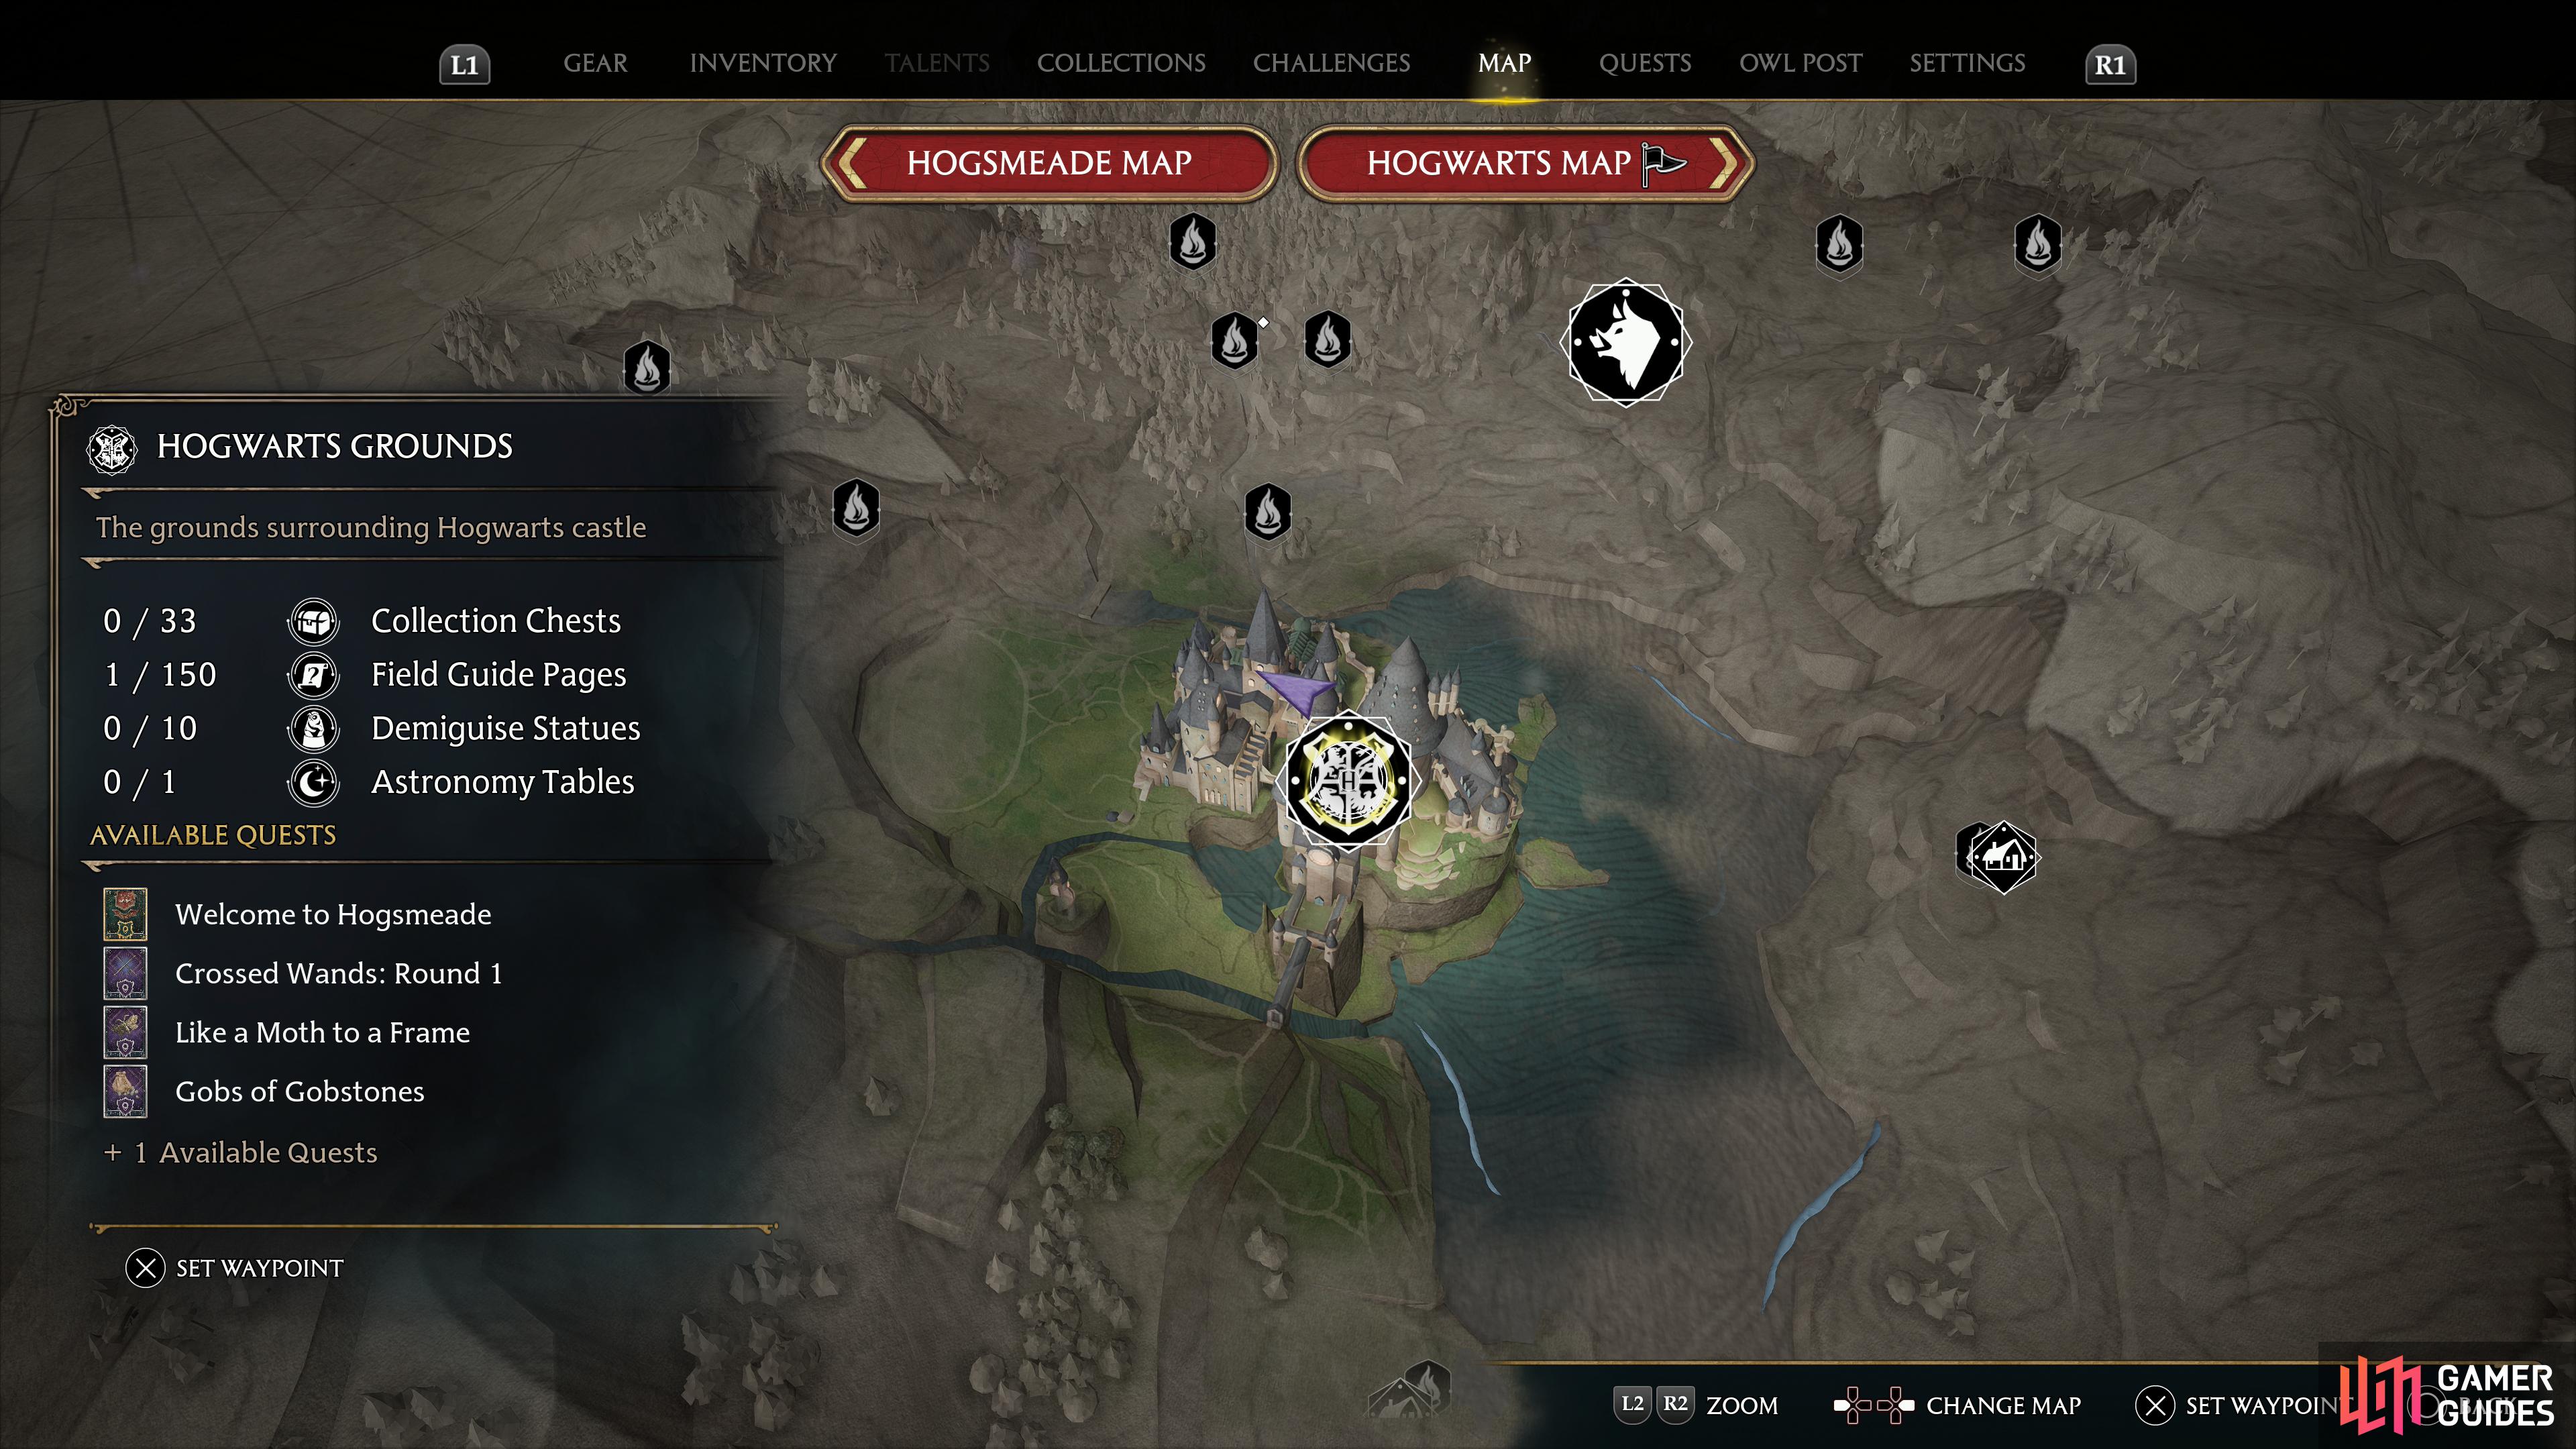 Checking the various points of interest on the World Map will reveal available quests.